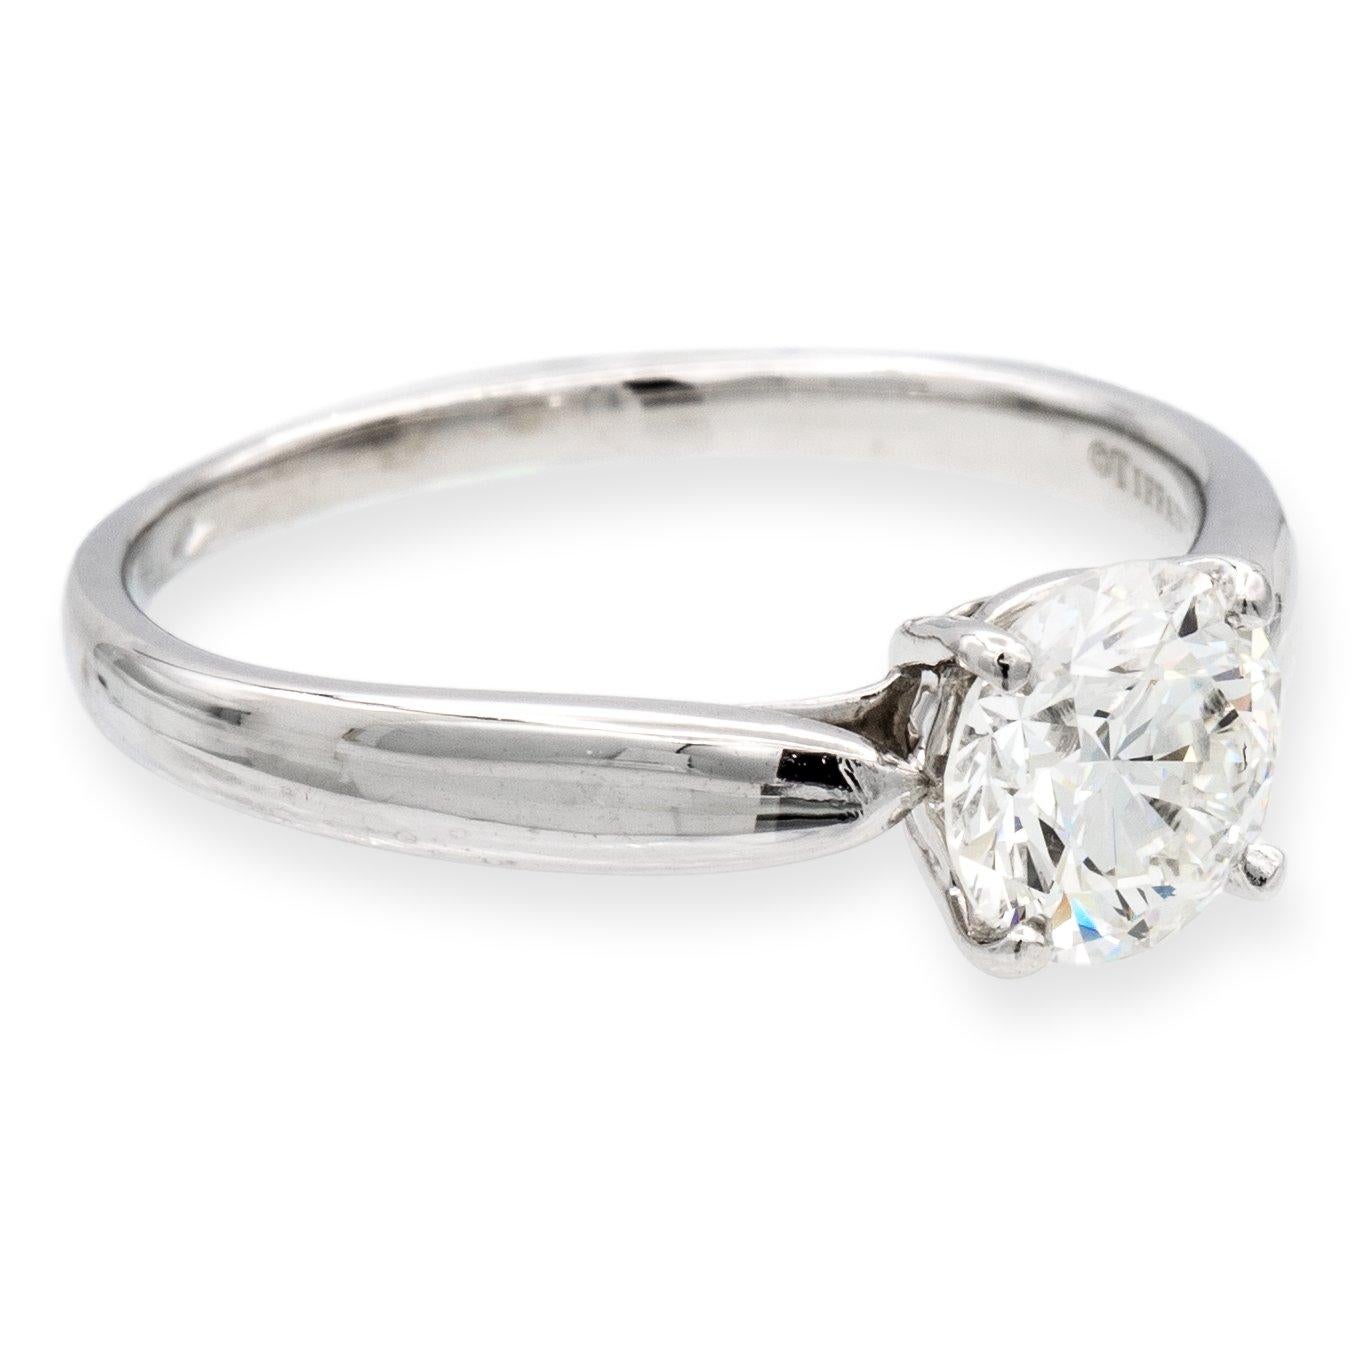 Tiffany & Co. round diamond engagement ring from the Harmony collection finely crafted in platinum featuring a round brilliant cut diamond center  weighing 1.15 carats I color VS2 clarity. This ring has a tapered shank design. Ring is fully